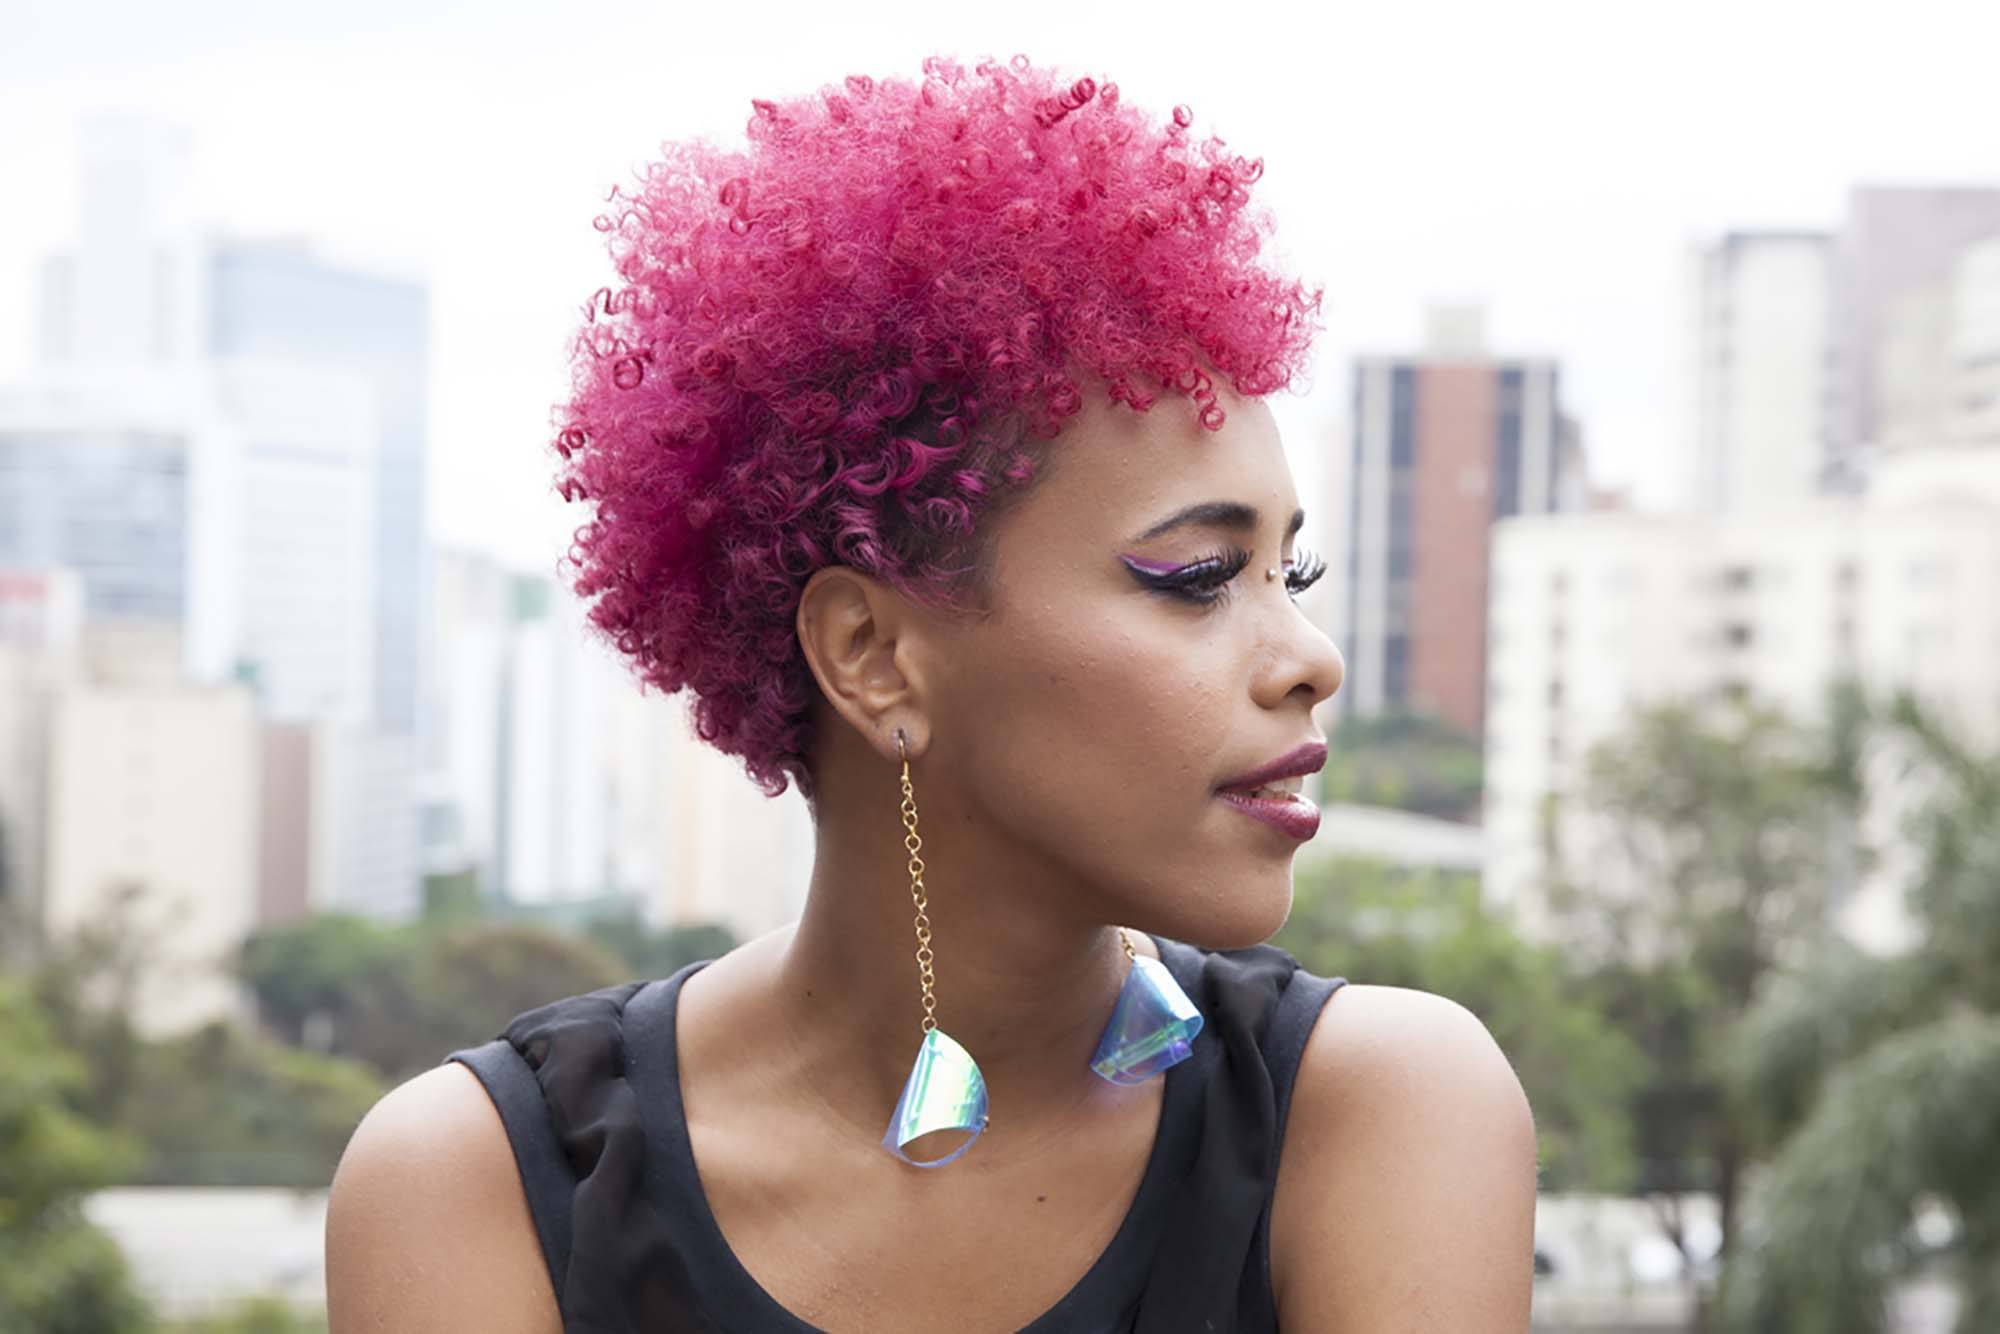 How to turn my hair to natural pink - Quora